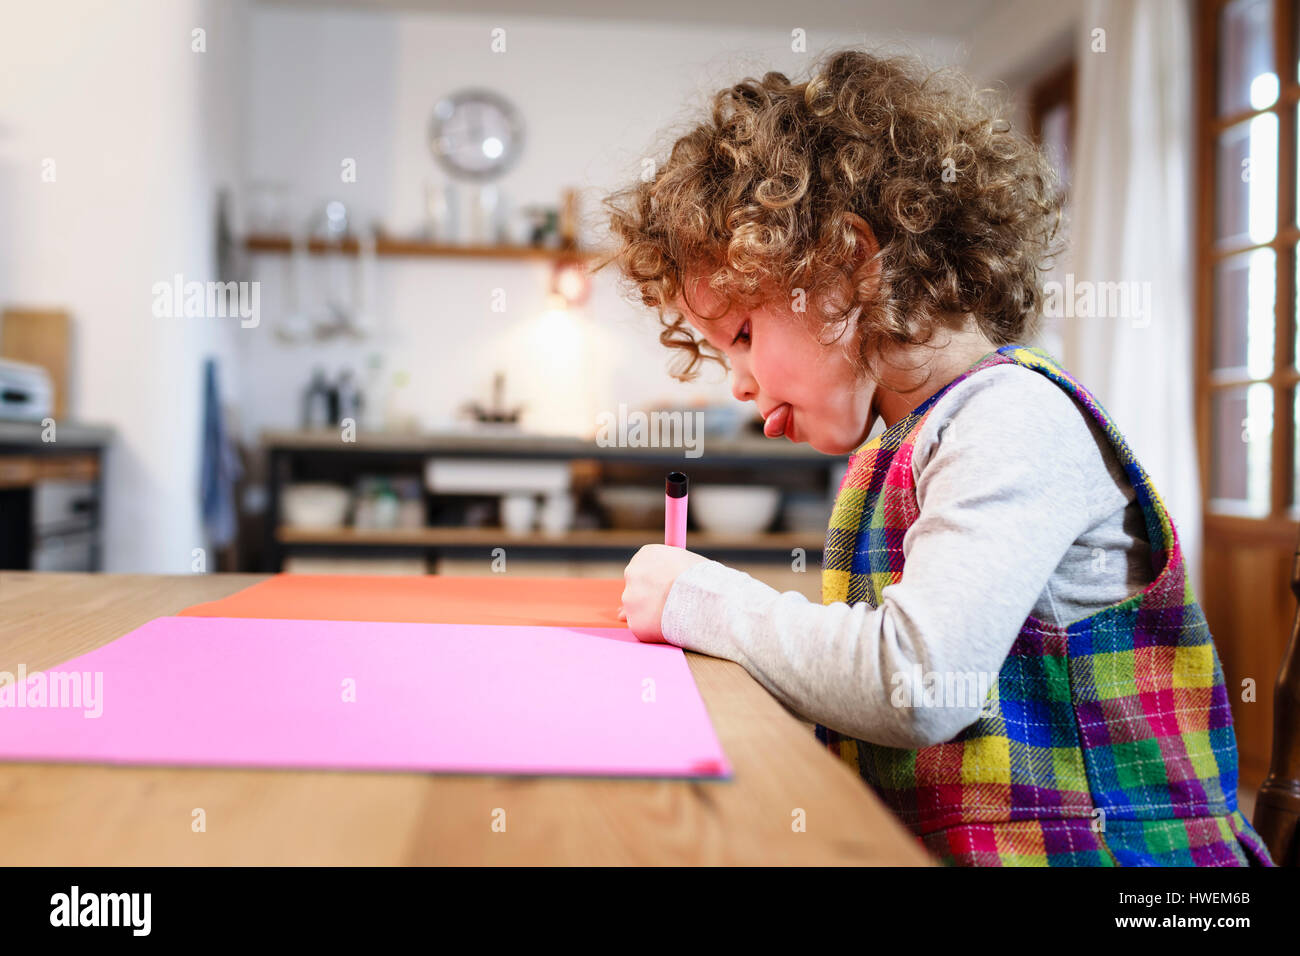 Girl drawing on pink paper at table Stock Photo